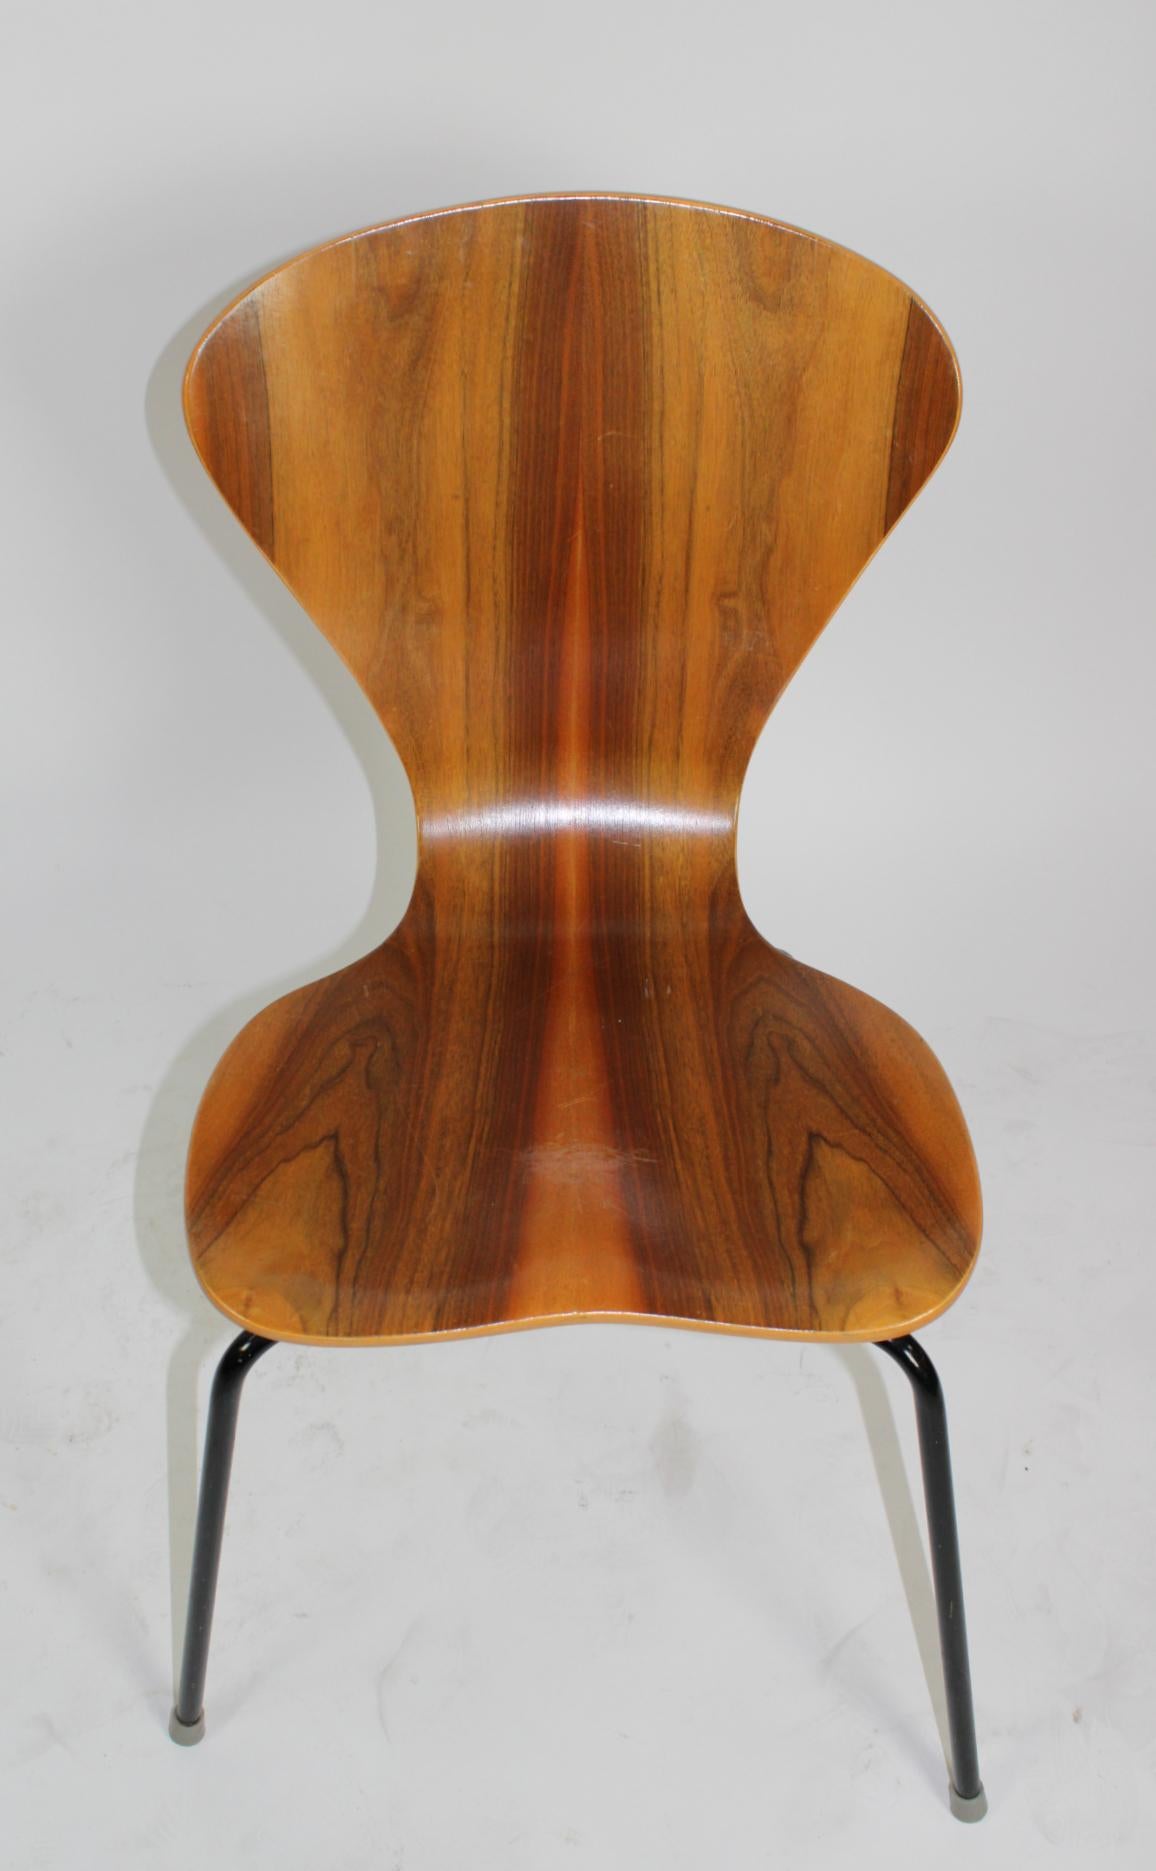 molded wood chairs